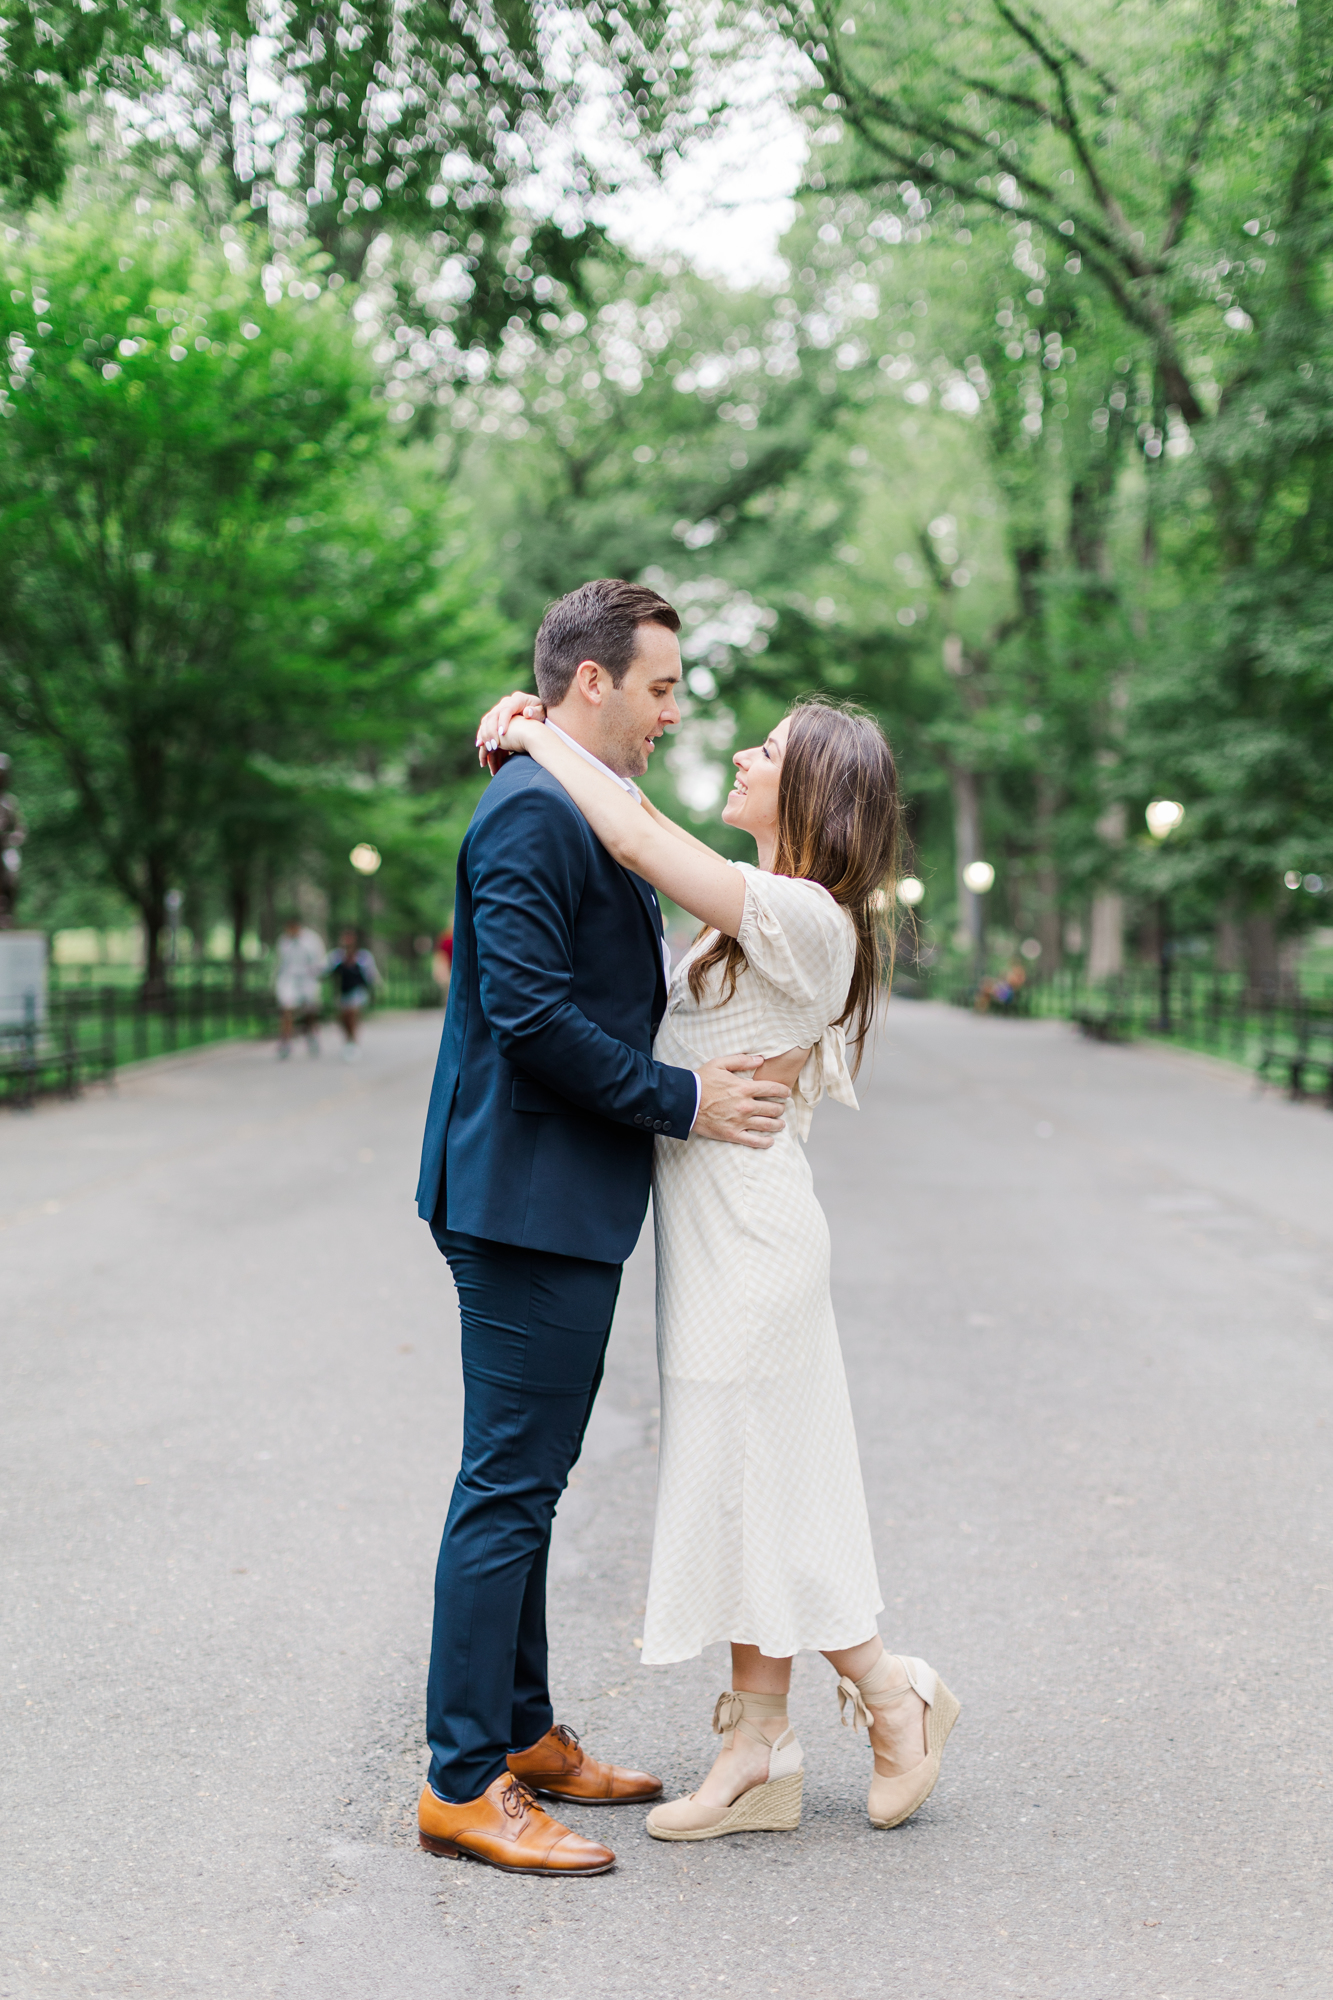 Sweet Pose Ideas for your Engagement Session